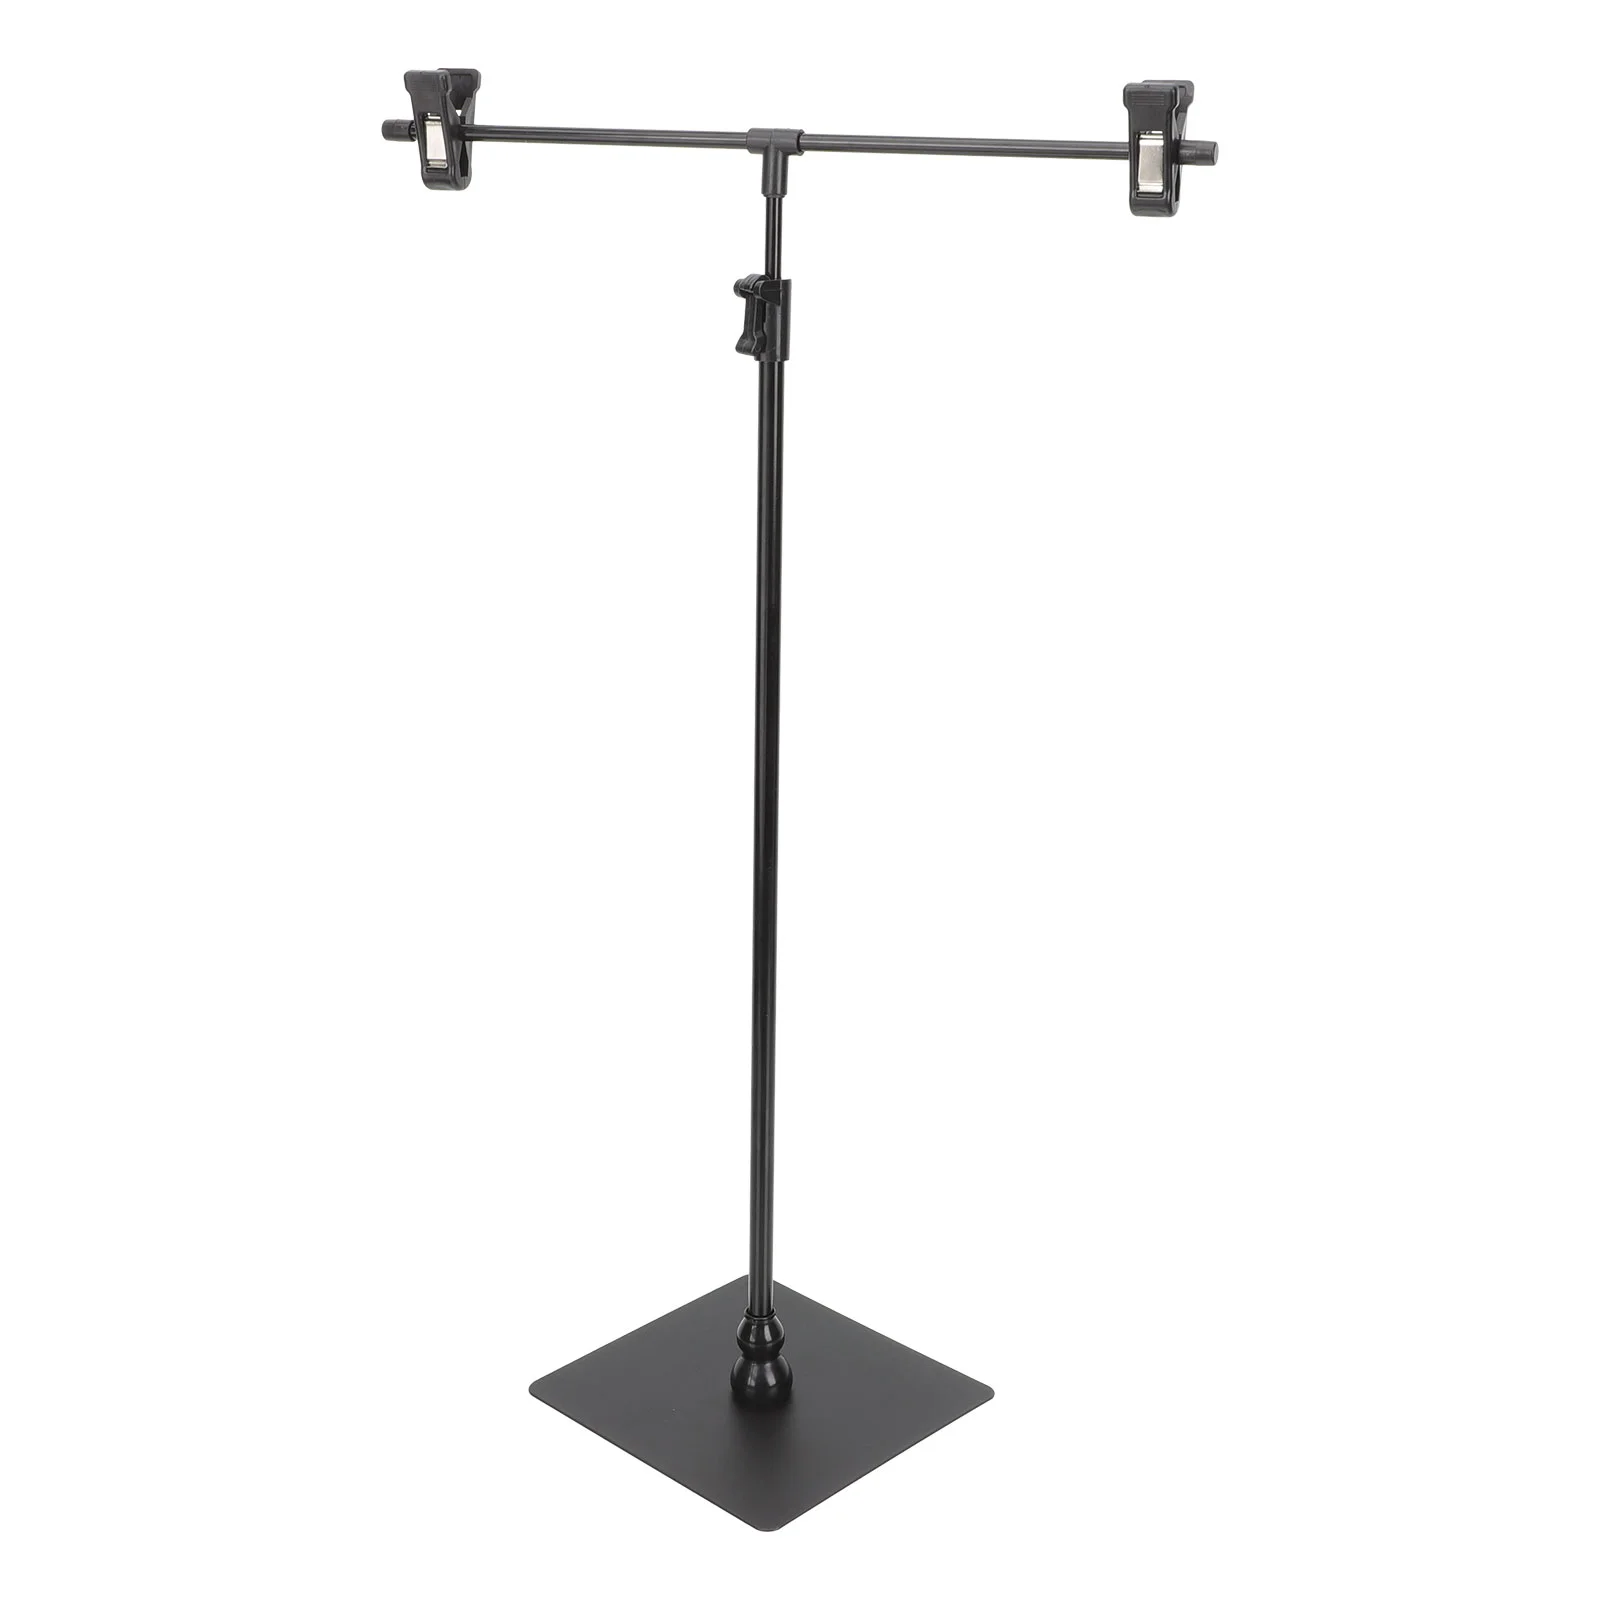 Advertising Display Stand Multipurpose Poster T-shaped Holders Tabletop Tripod Clip Stainless Steel Showing Desktop